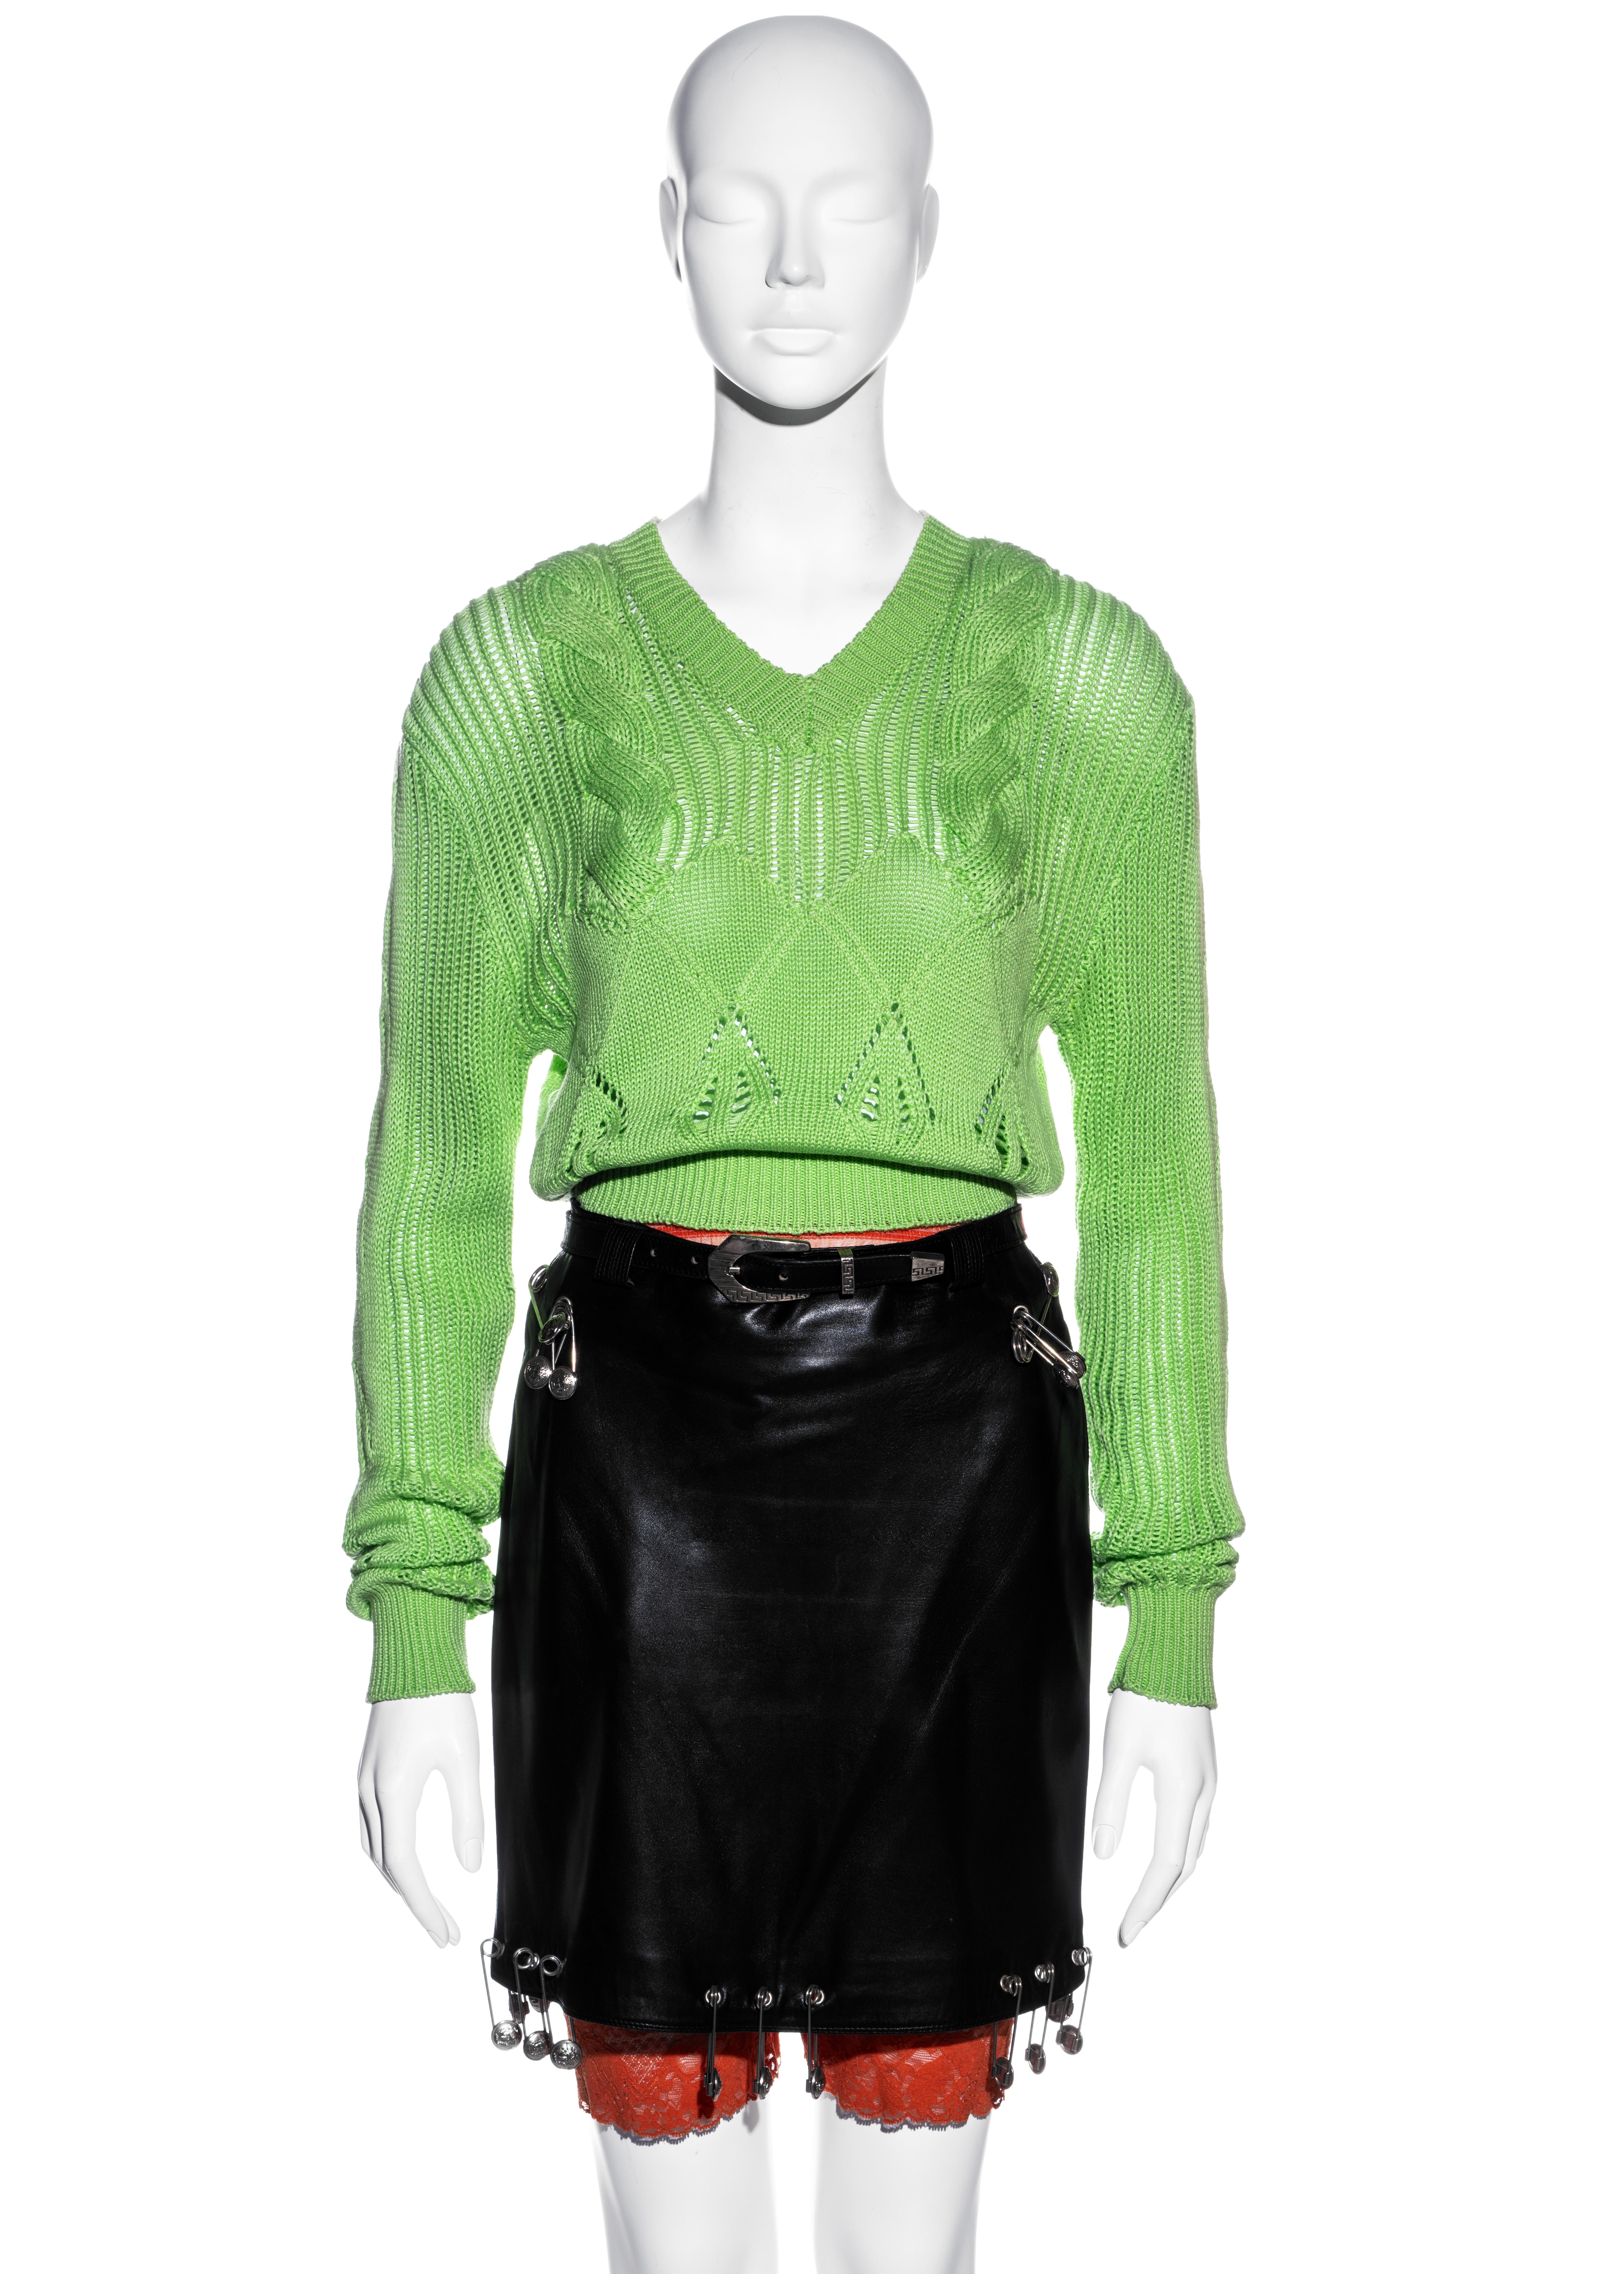 ▪ Gianni Versace runway ensemble 
▪ Black leather pencil skirt 
▪ Neon green knitted v-neck sweater 
▪ Orange mesh cycling shorts with lace trim 
▪ Large silver Medusa safety pin adornments 
▪ IT 42 - FR 38 - UK 10 - US 6
▪ Spring-Summer 1994